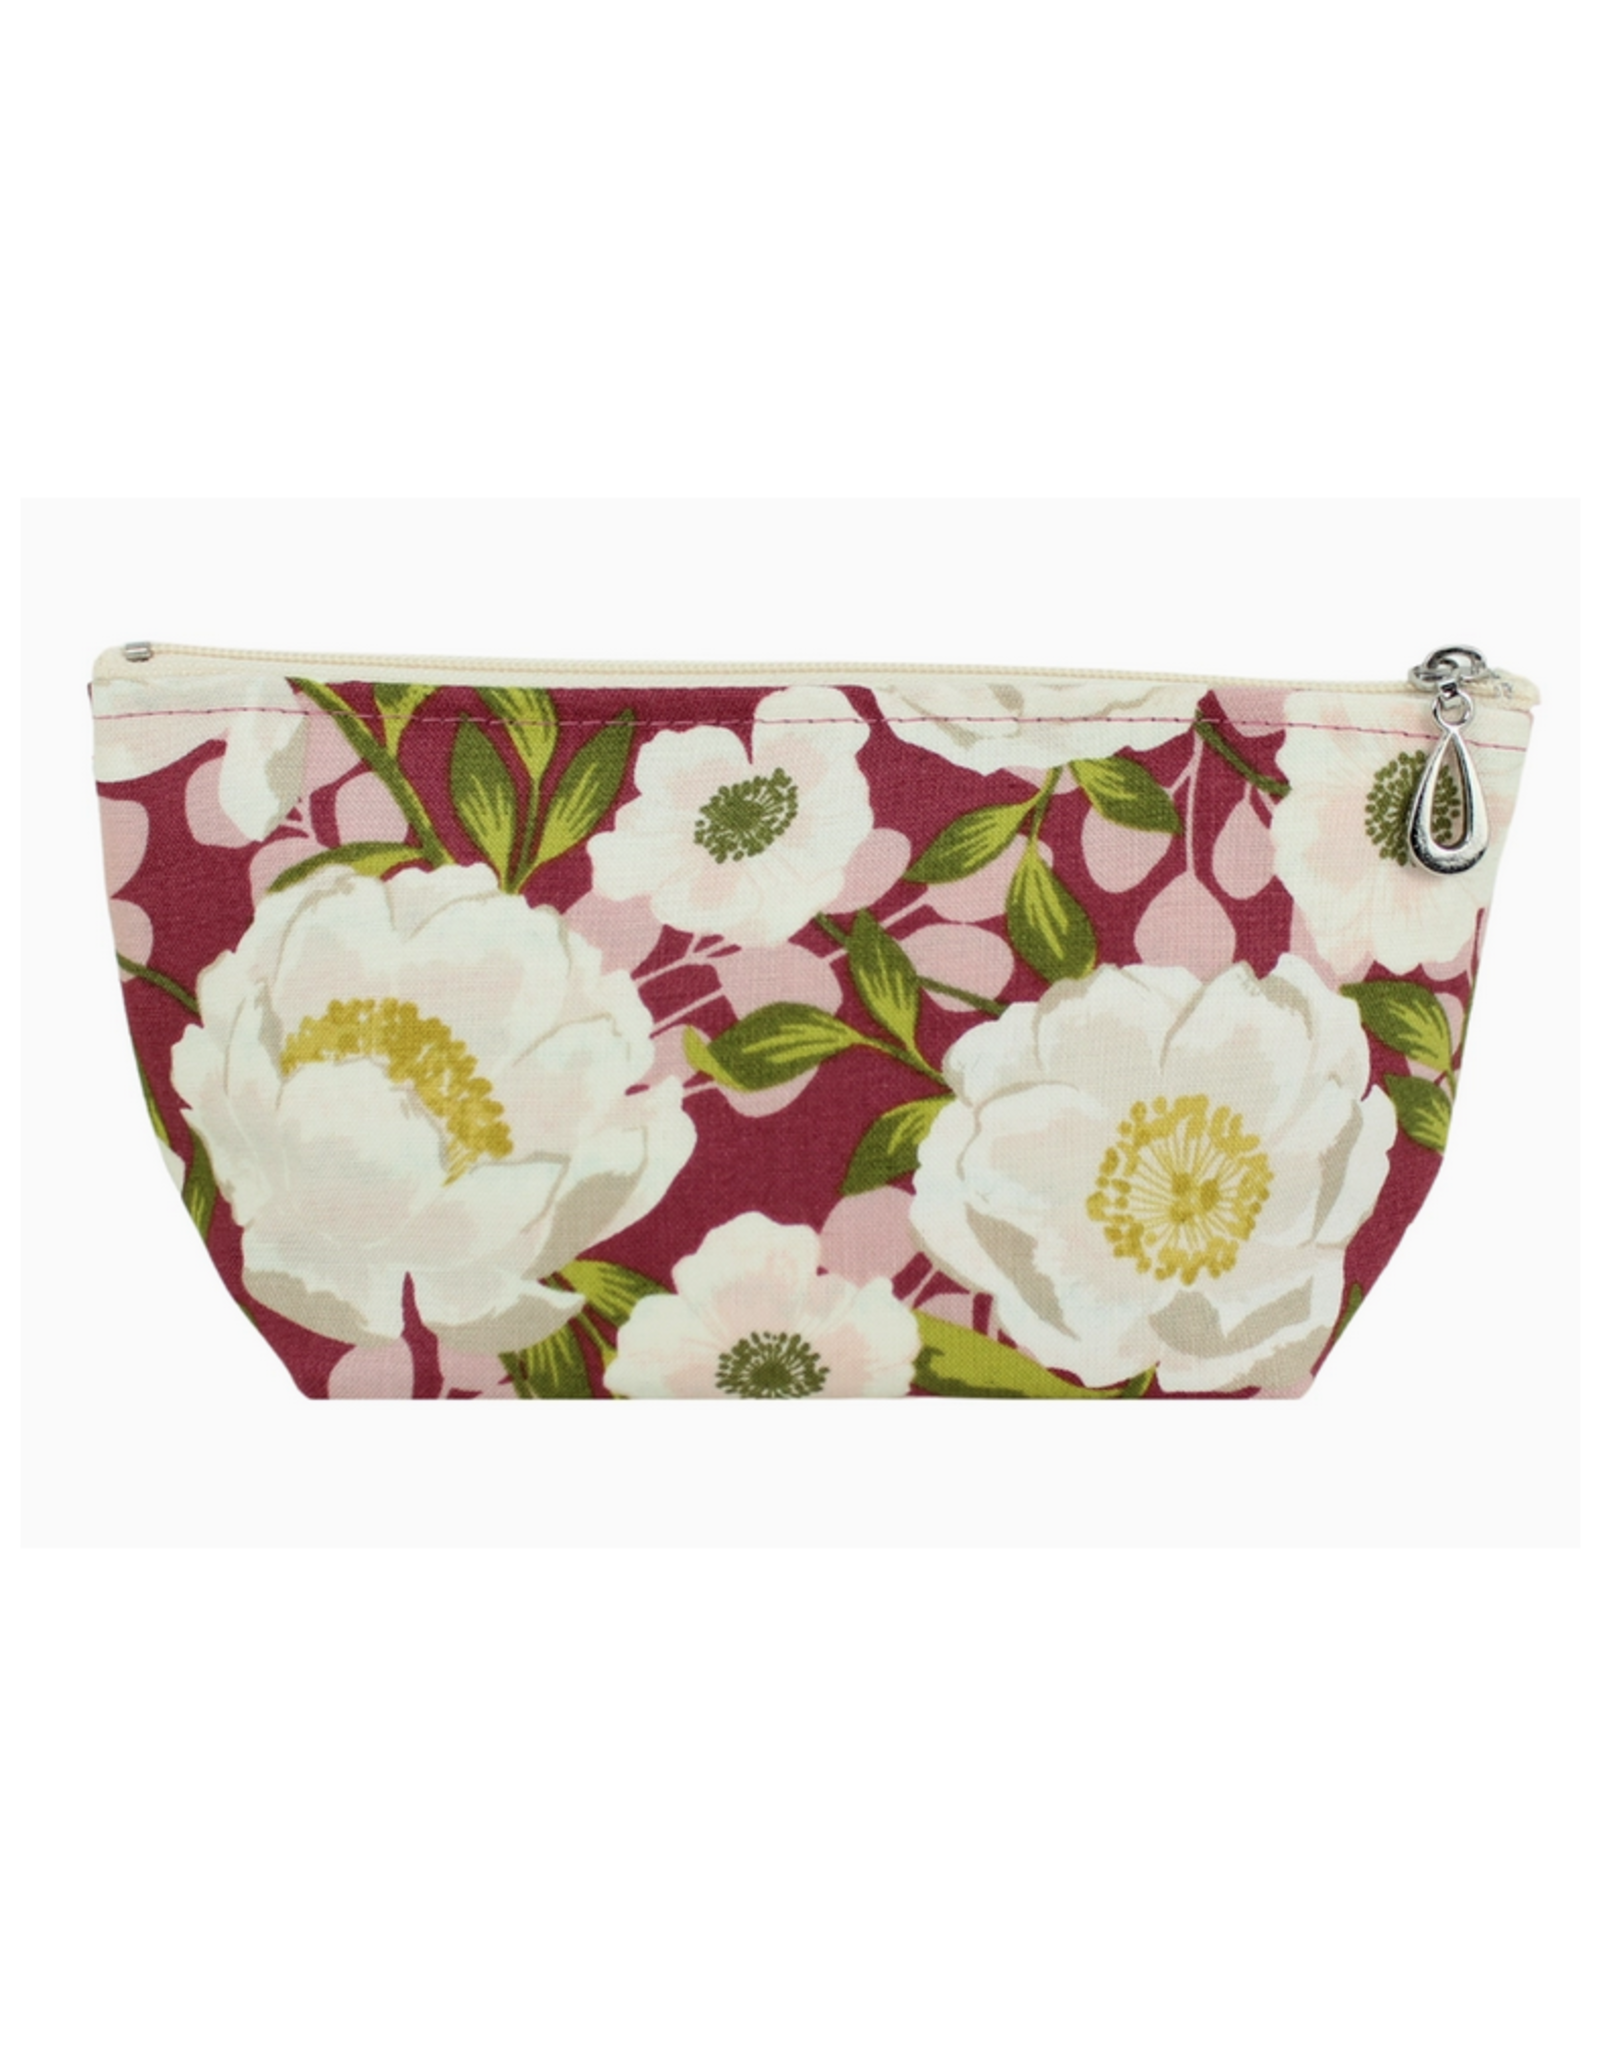 Small Make Up Bag - Wine Floral